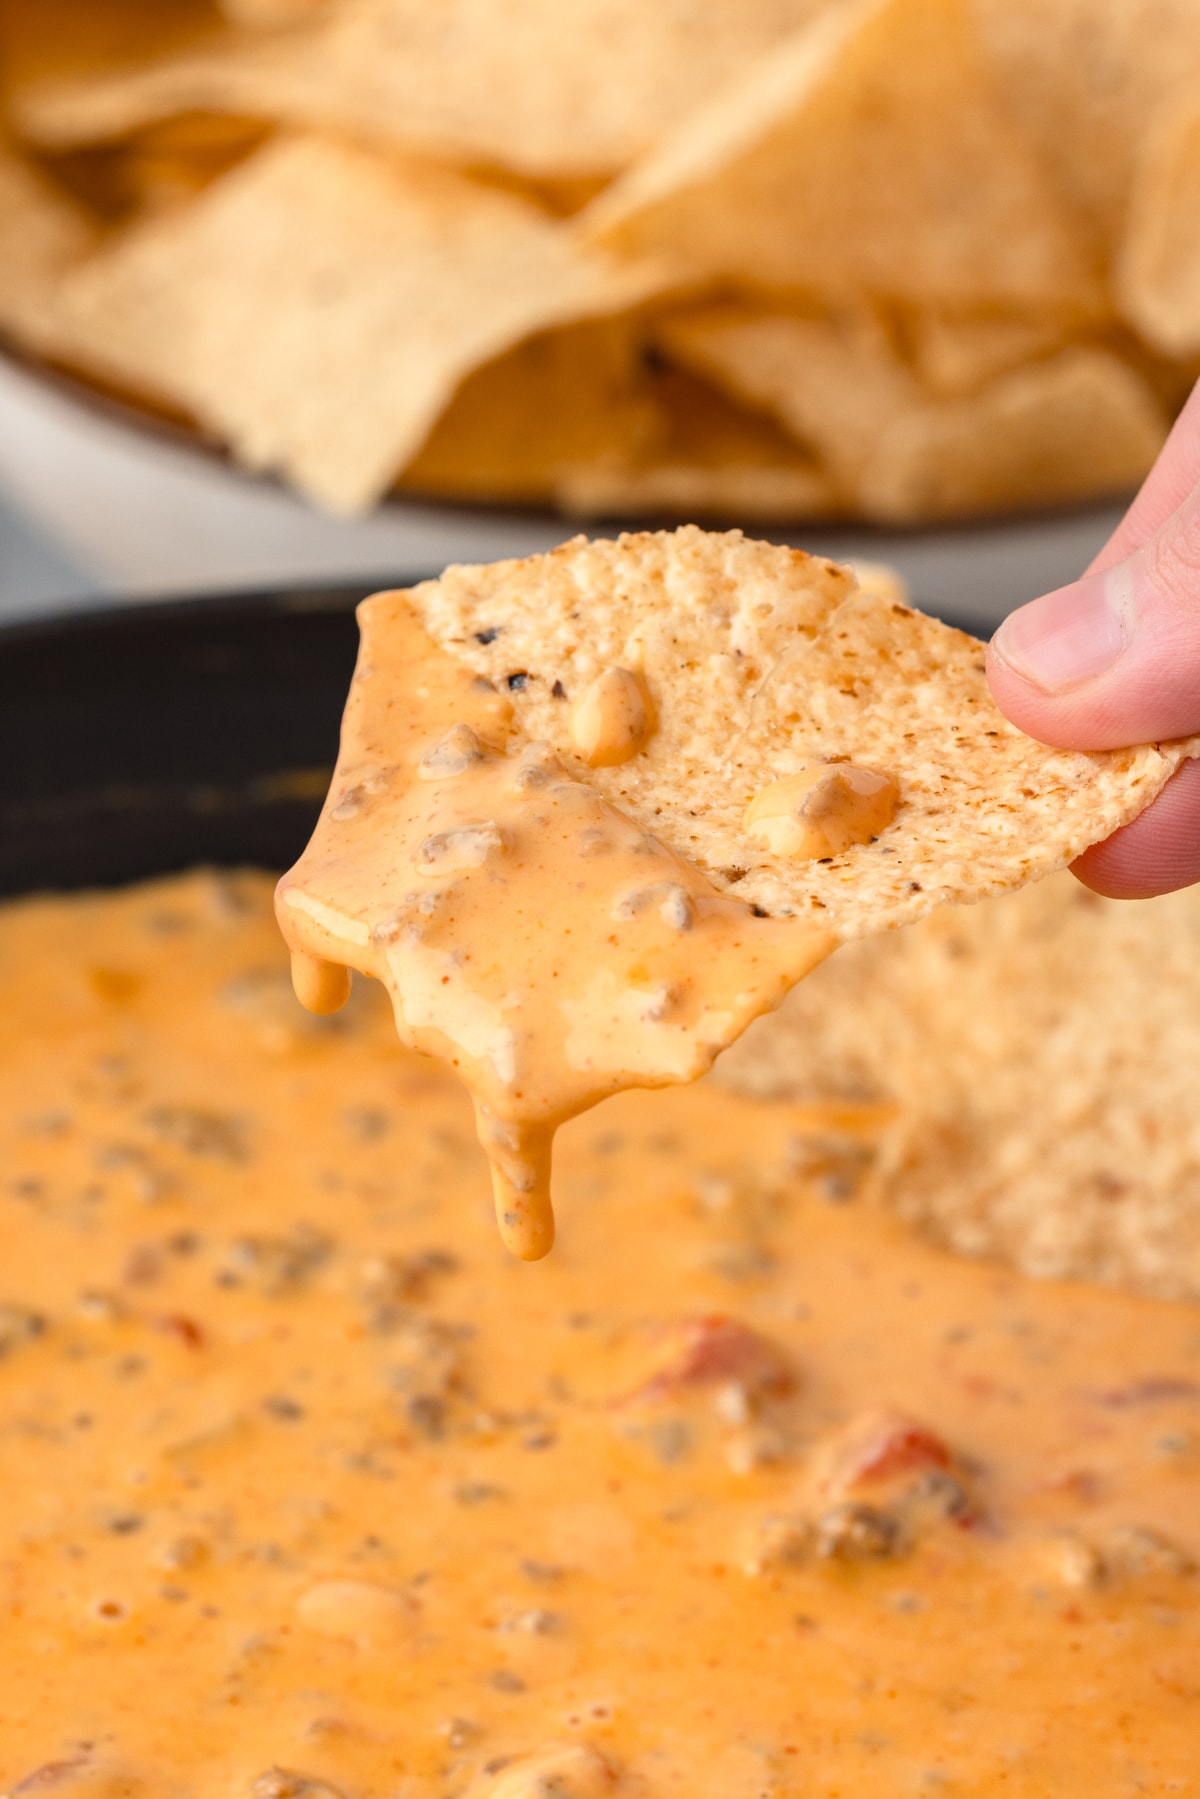 up close photo of a creamy cheese drip on a tortilla chip